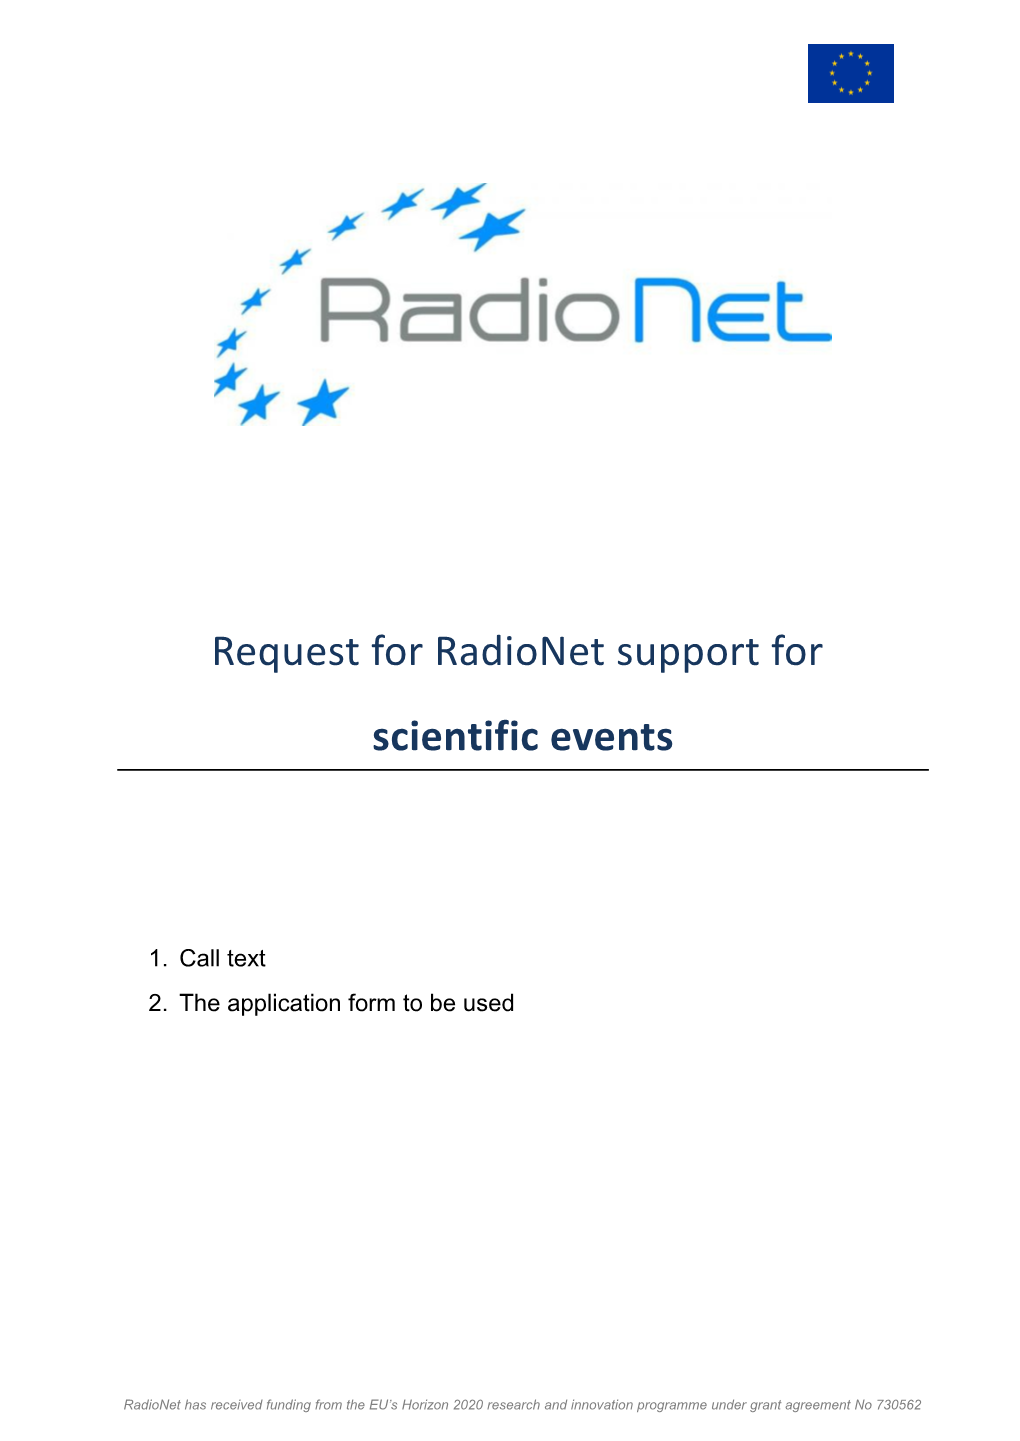 Request for Radionet Support For